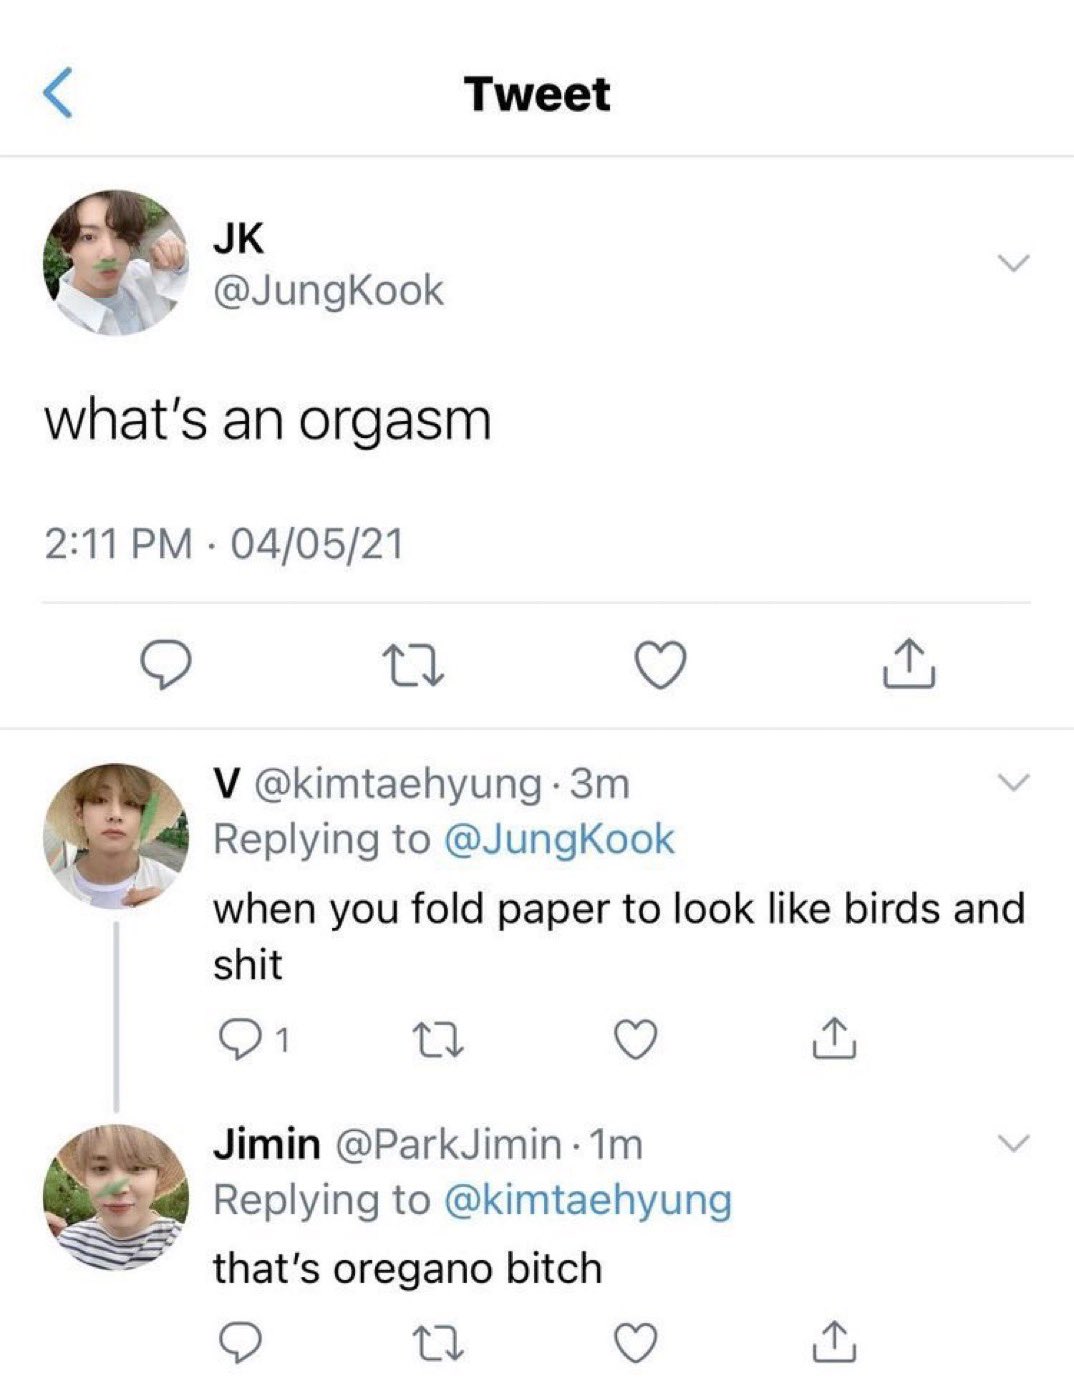 the internet hall of shame - Jk what's an orgasm 040521 . 27 Tweet V . 3m when you fold paper to look birds and shit 1 22 Jimin Jimin 1m that's oregano bitch 27